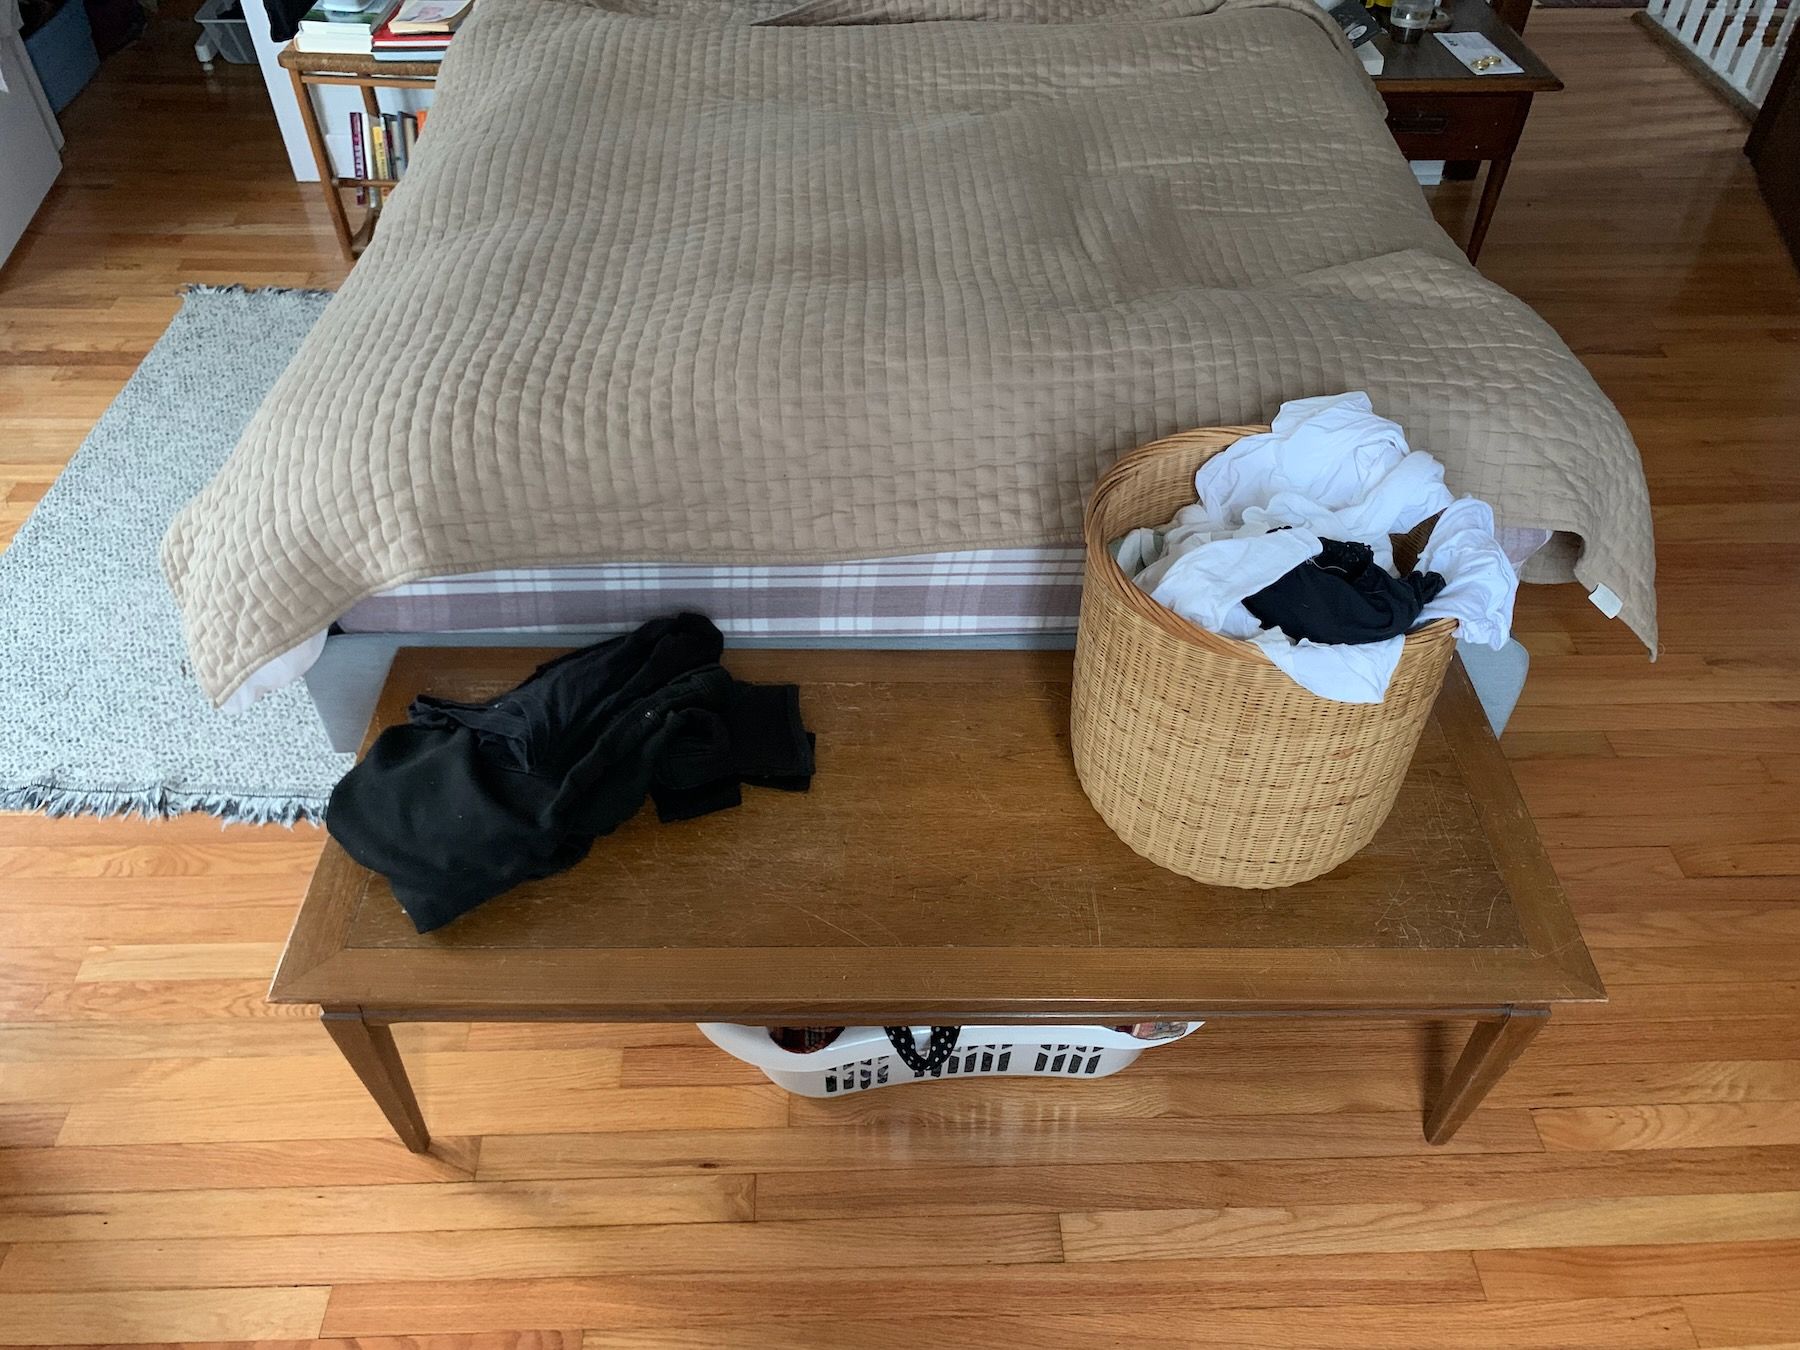 Close-up from a few feet away from foot of bed. Wooden coffee table bench with sharp corners, laundry baskets above and below, and small pile of black clothes.